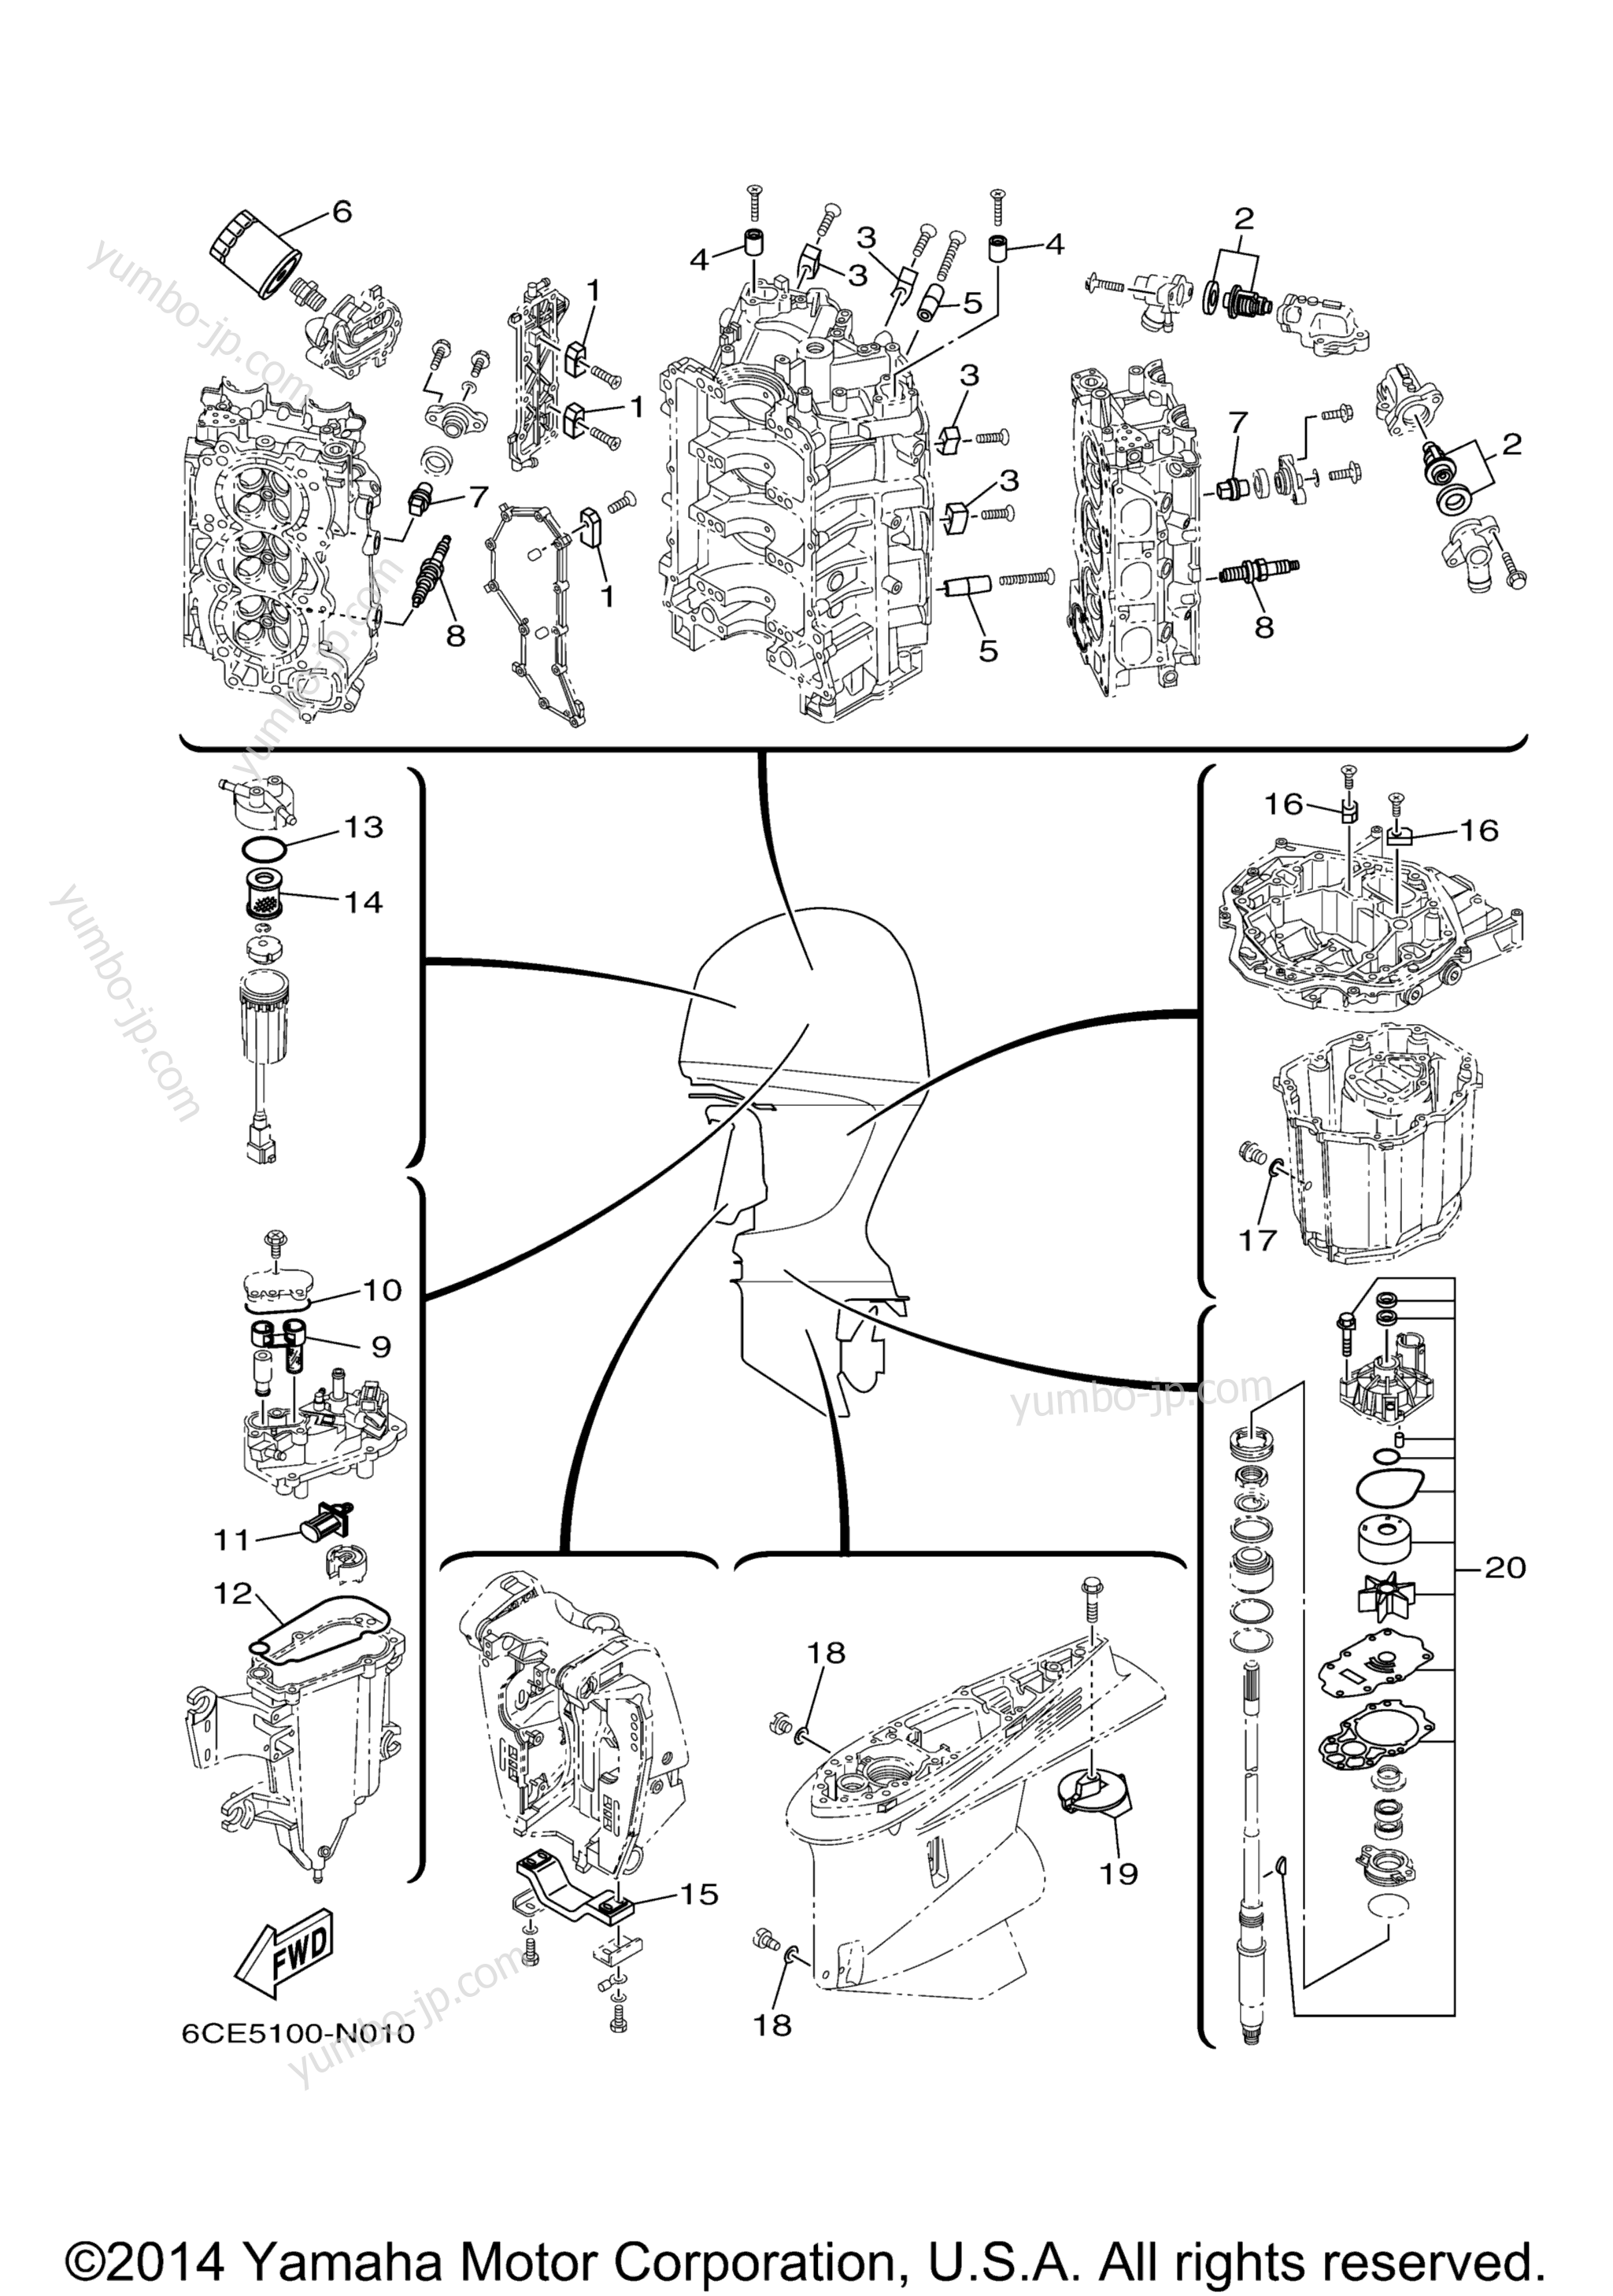 Scheduled Service Parts for outboards YAMAHA LF300XCA (0114) 2006 year